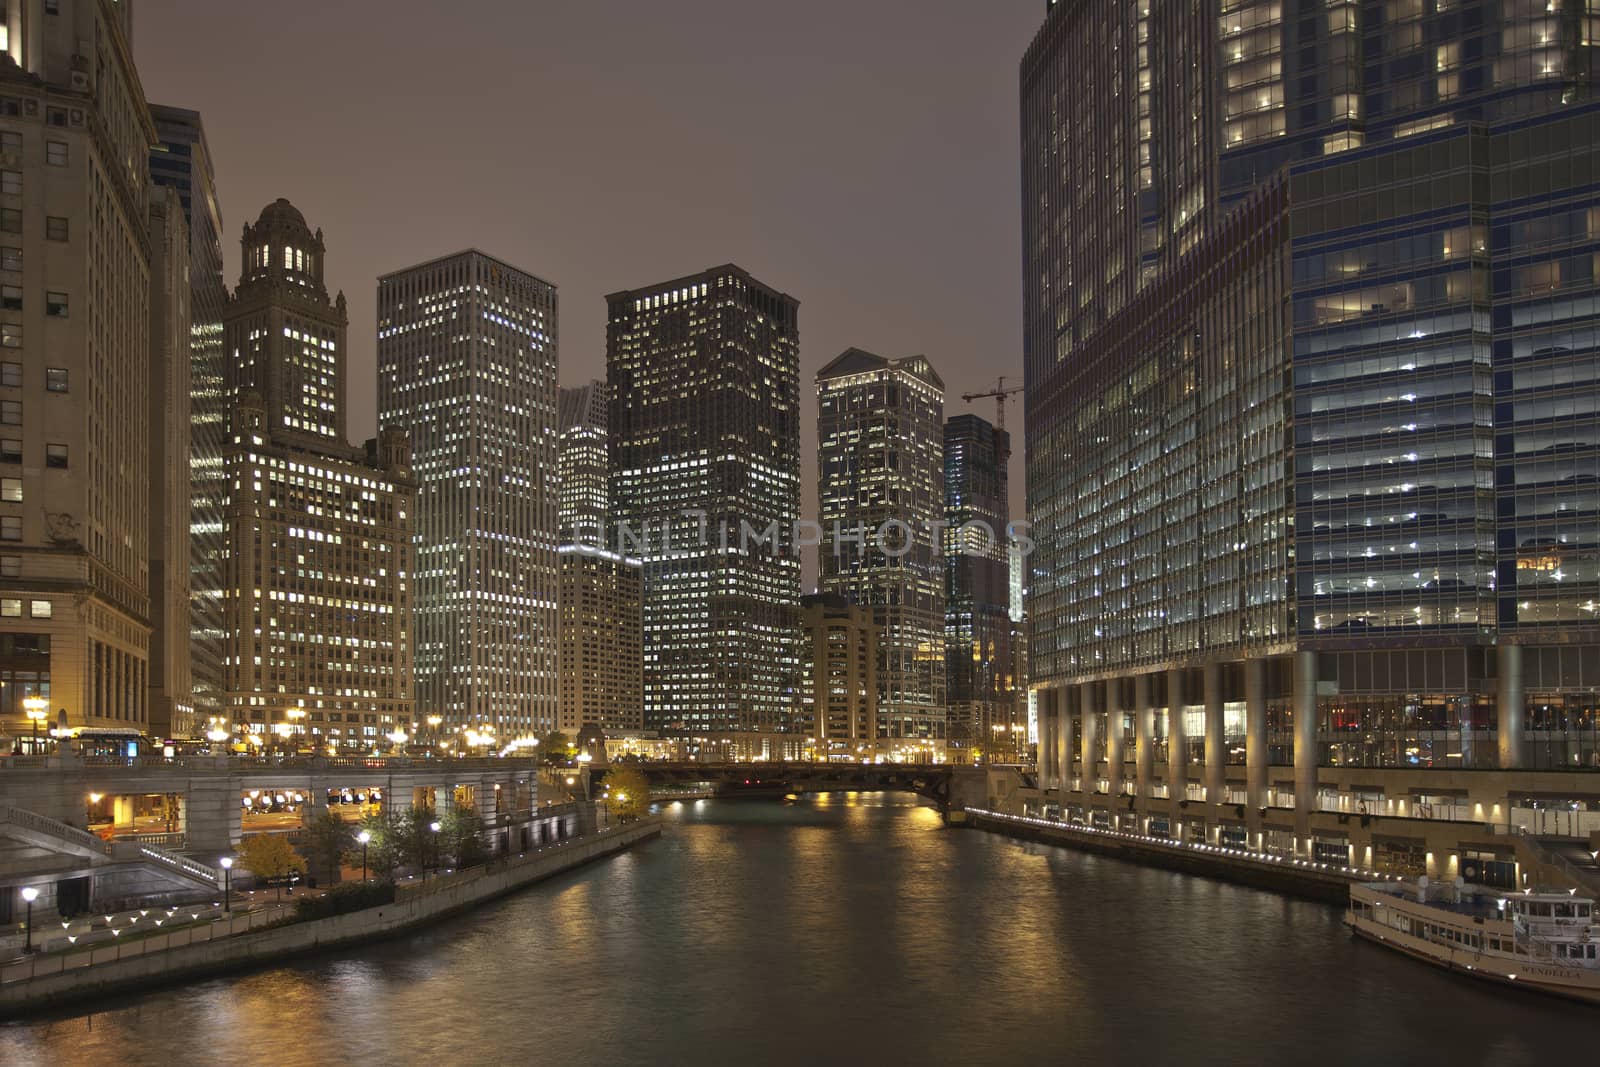 Night view of the Chicago River from Michigan Avenue